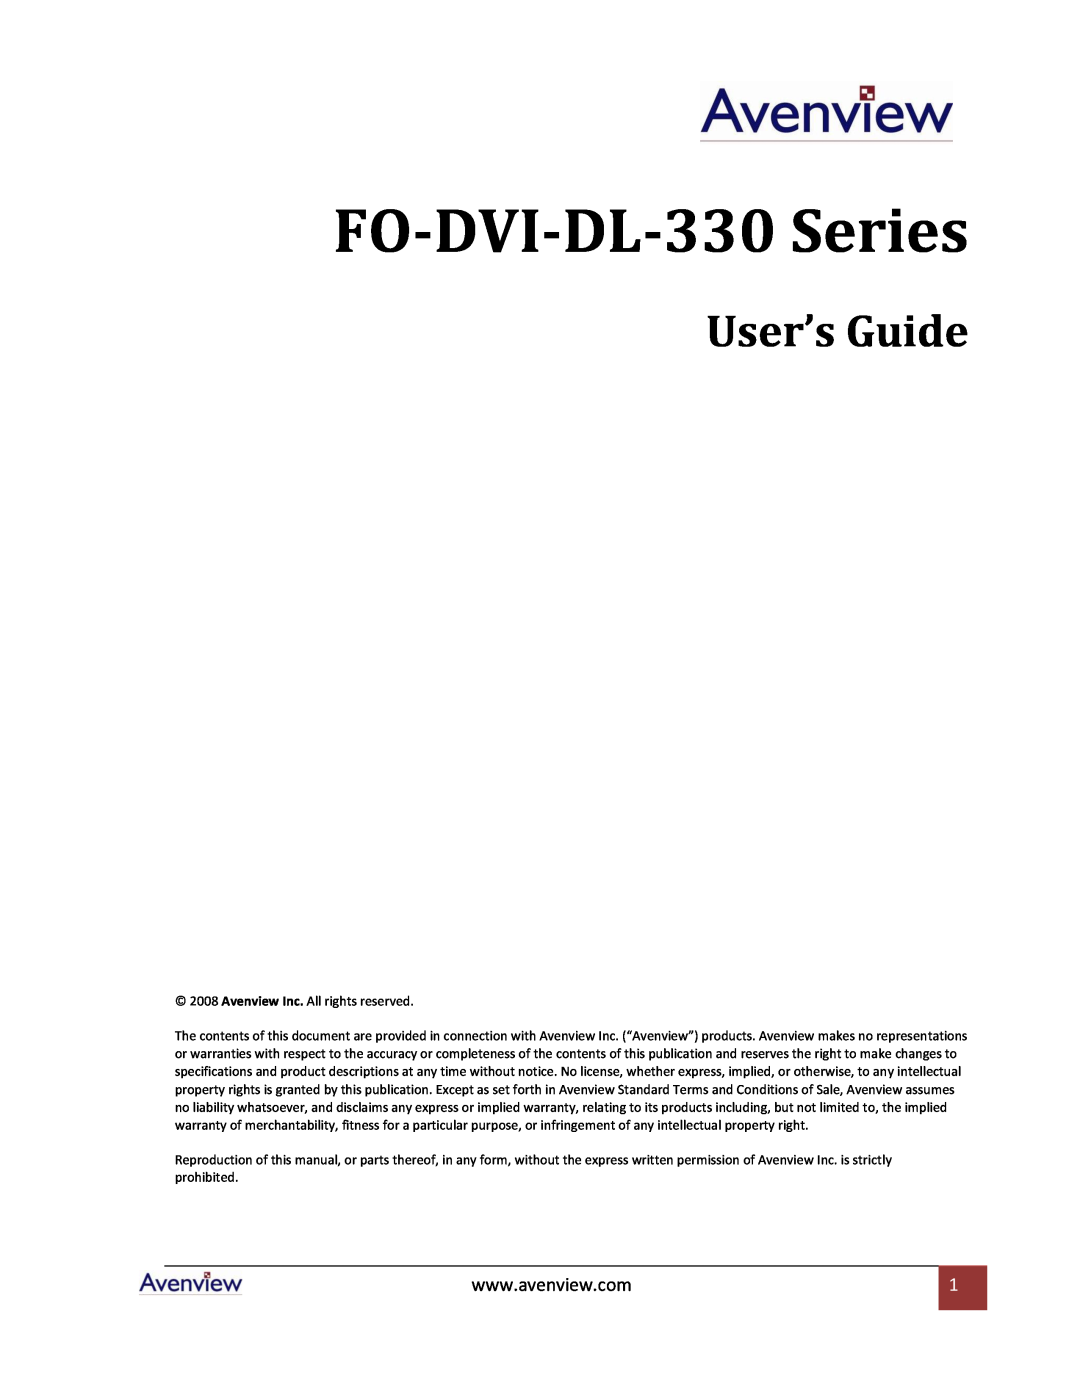 Avenview FO-DVI-DL-330 Series specifications User’s Guide 